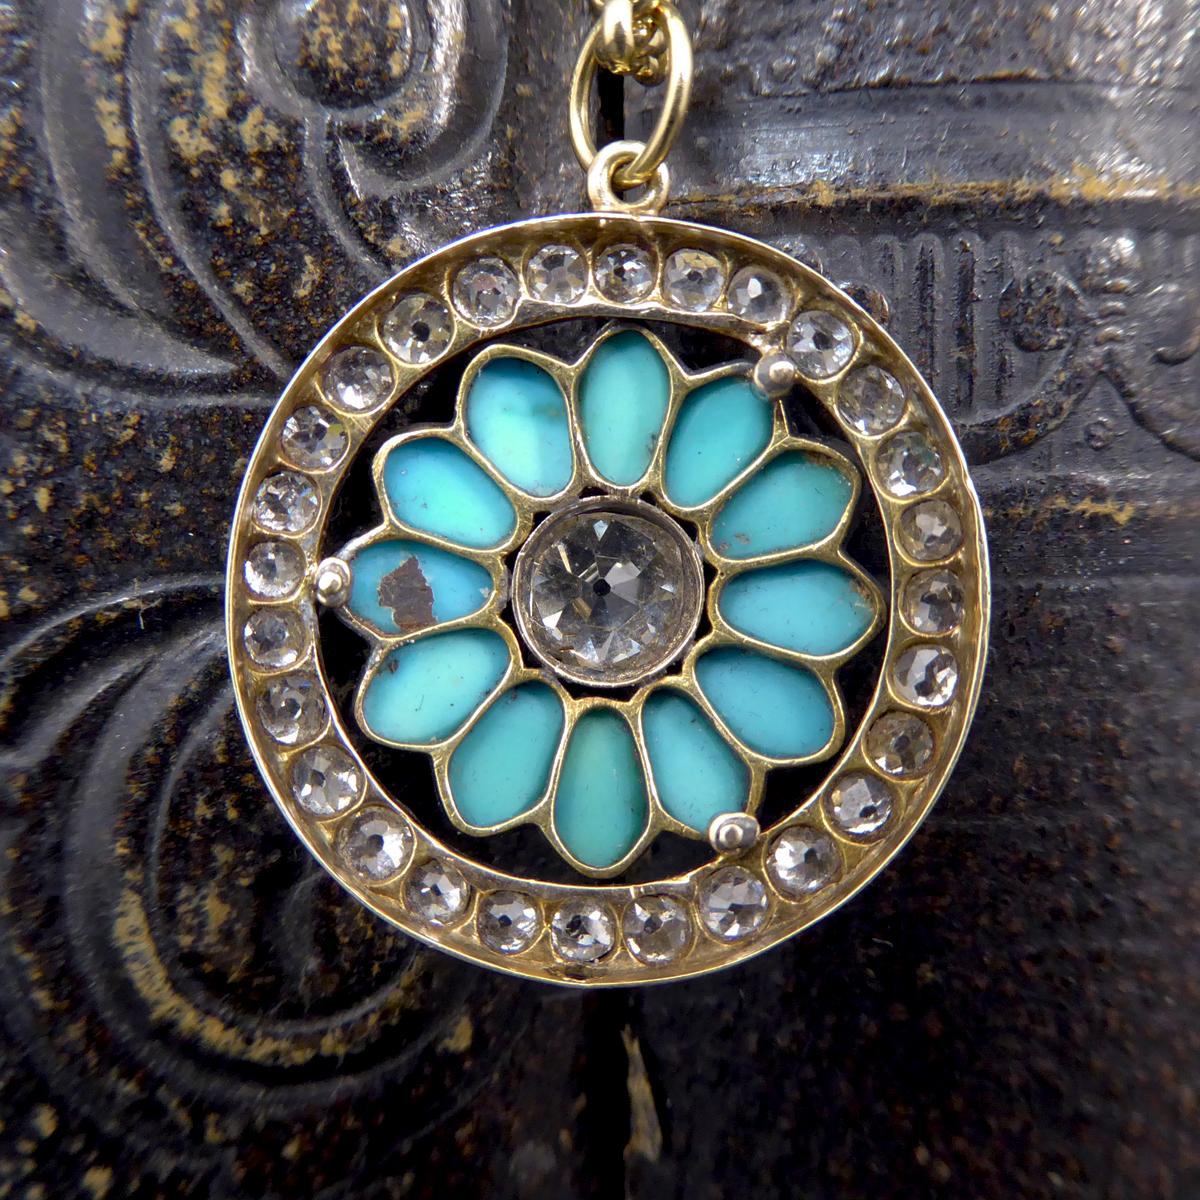 Cushion Cut Antique Victorian Diamond and Turquoise Flower Pendant on Yellow Gold Chain